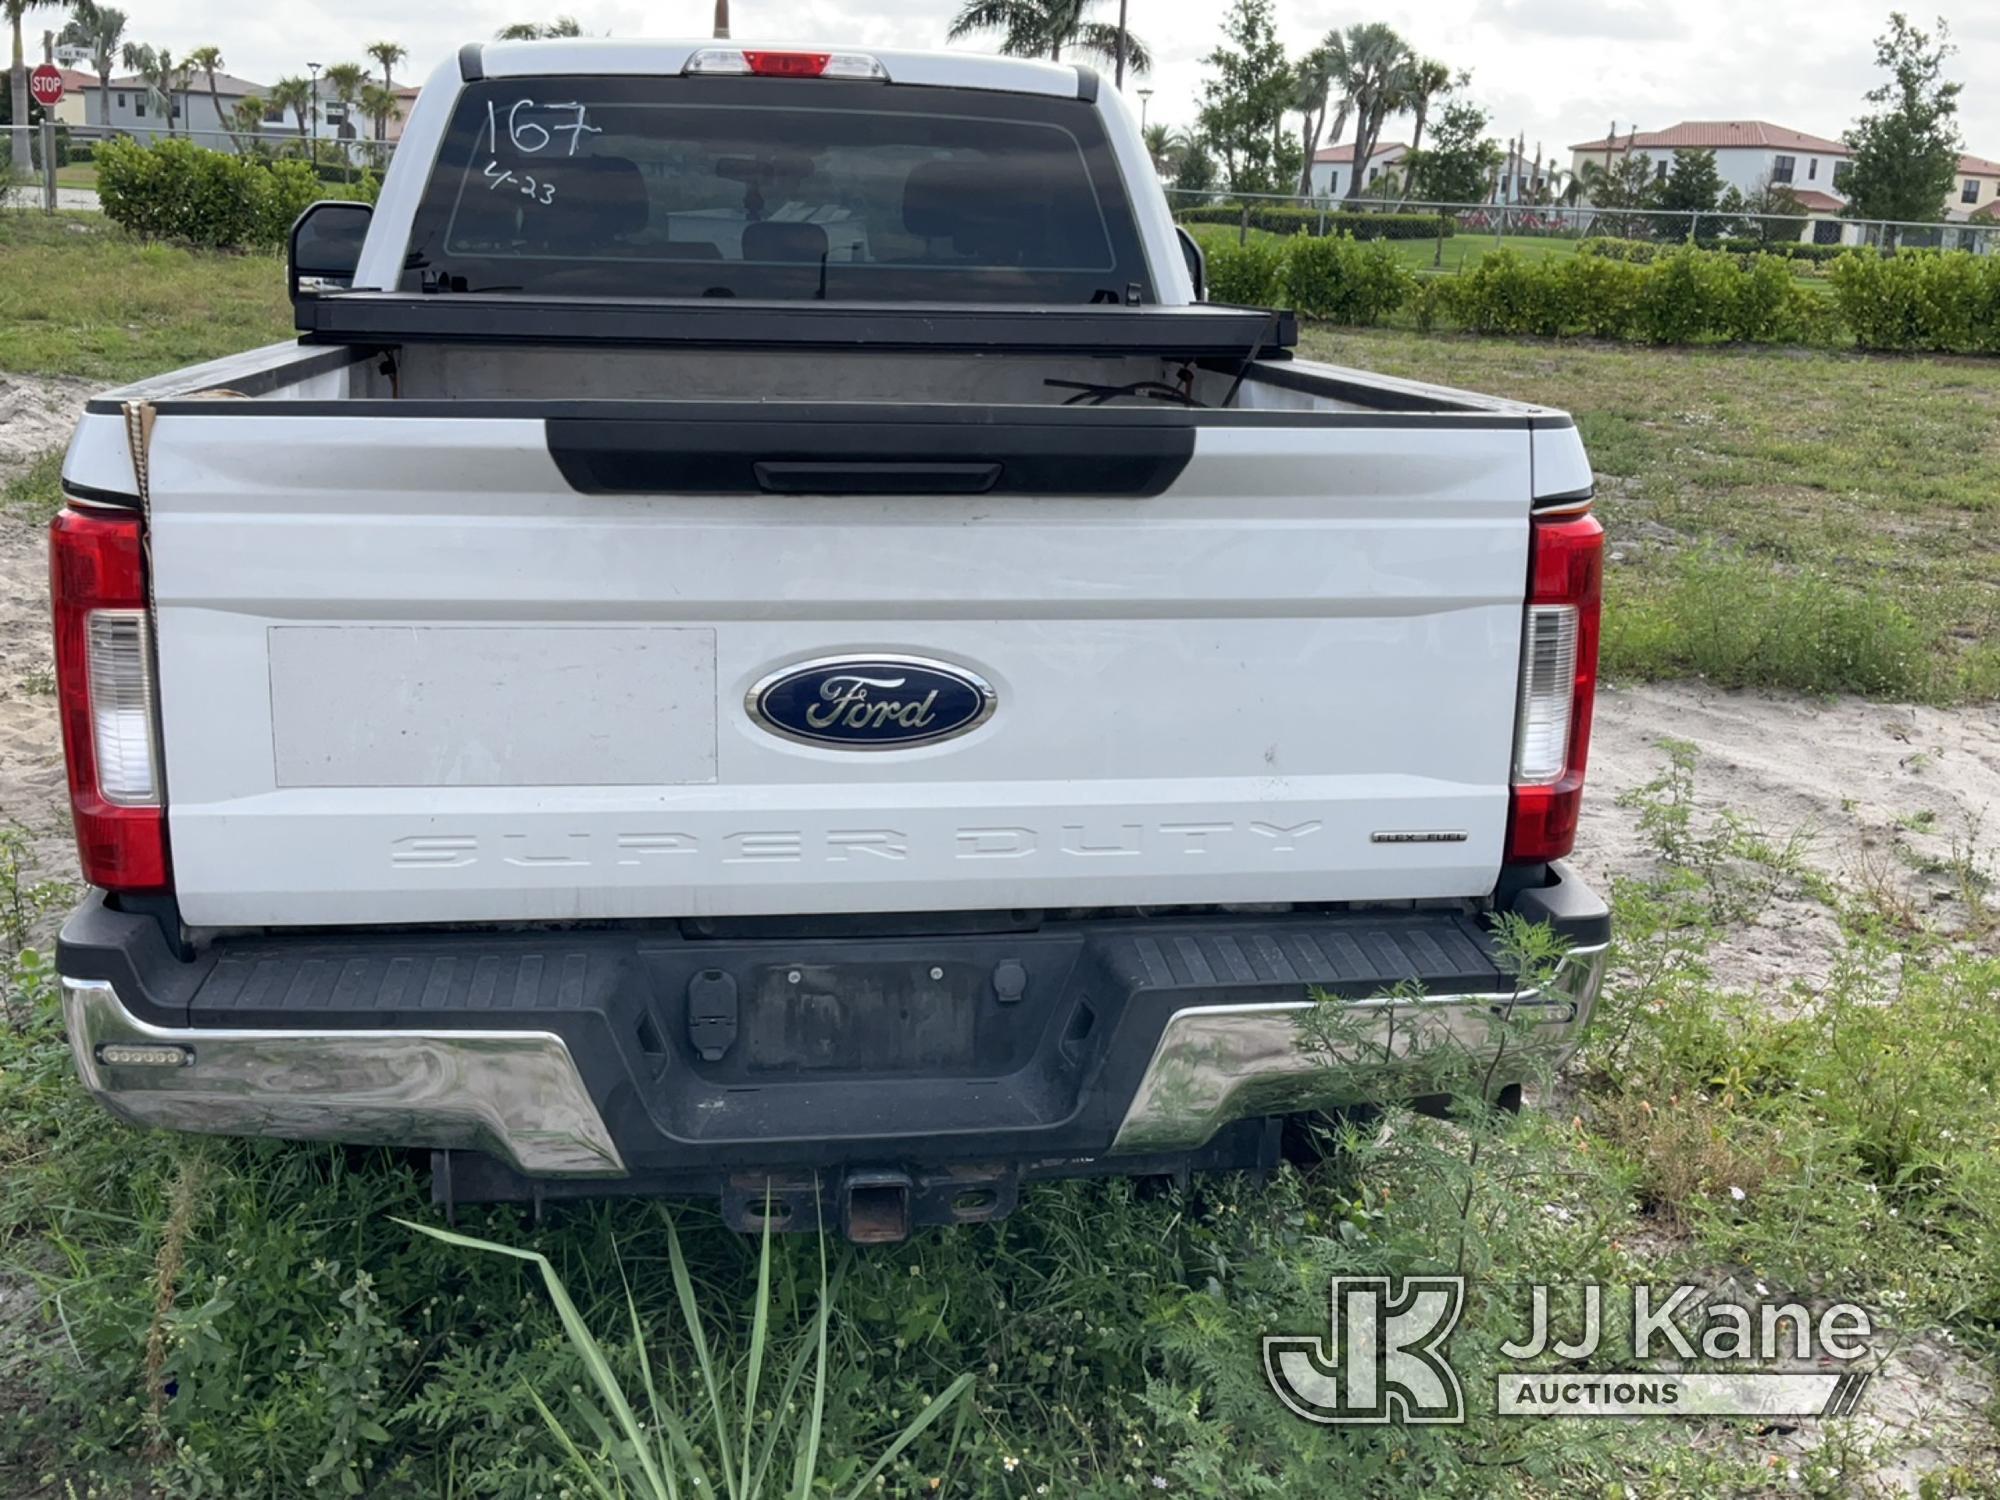 (Westlake, FL) 2017 Ford F250 4x4 Extended-Cab Pickup Truck Will Not Stay Running & Does Not Move) (